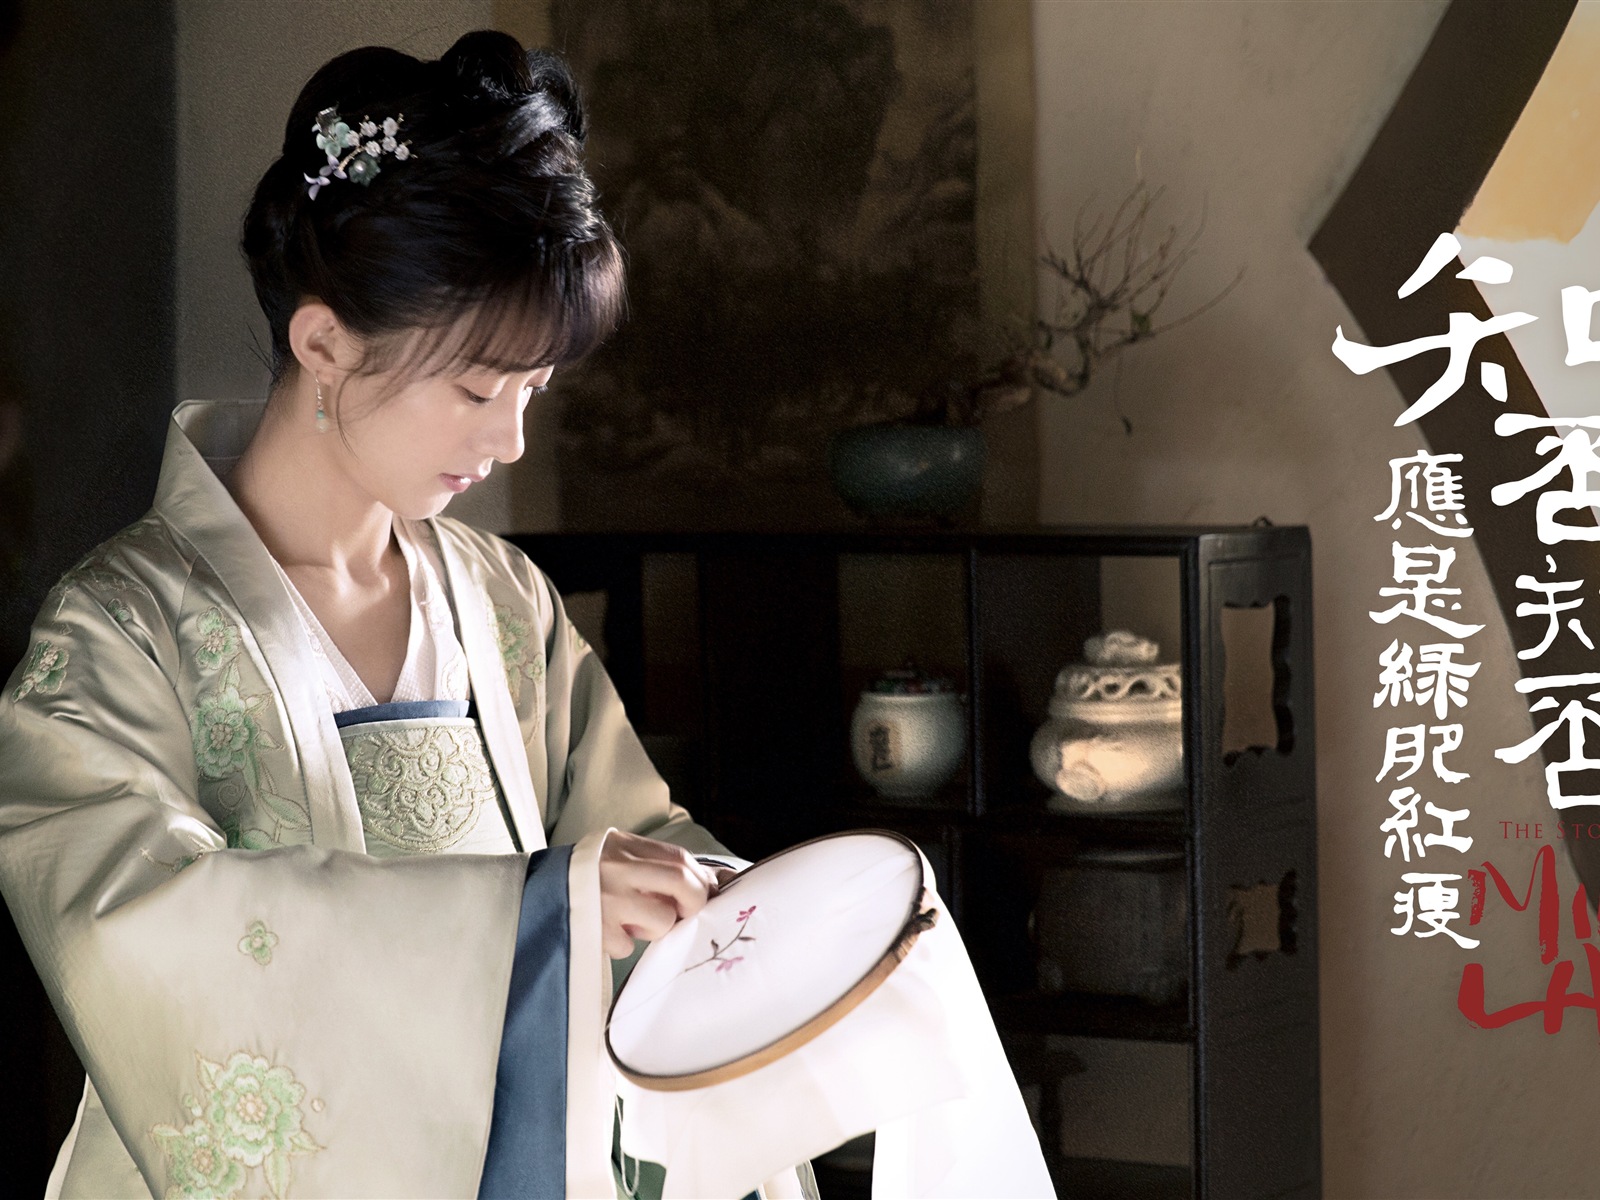 The Story Of MingLan, TV series HD wallpapers #23 - 1600x1200